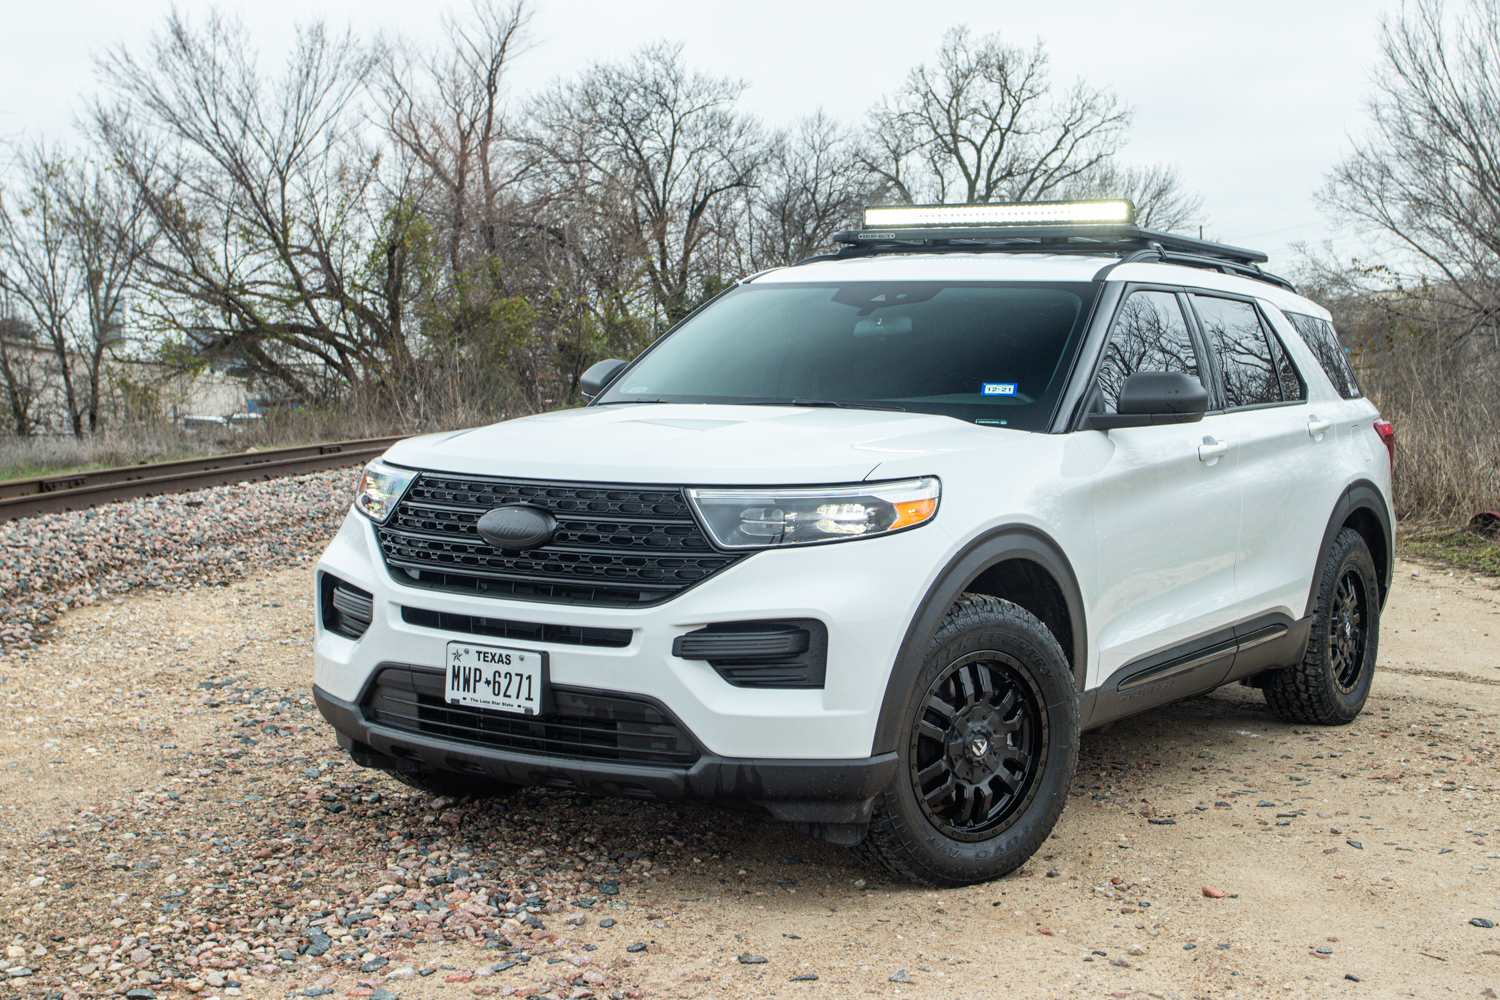 2020-ford-explorer-off-road-build-with-fuel-sledge-wheels